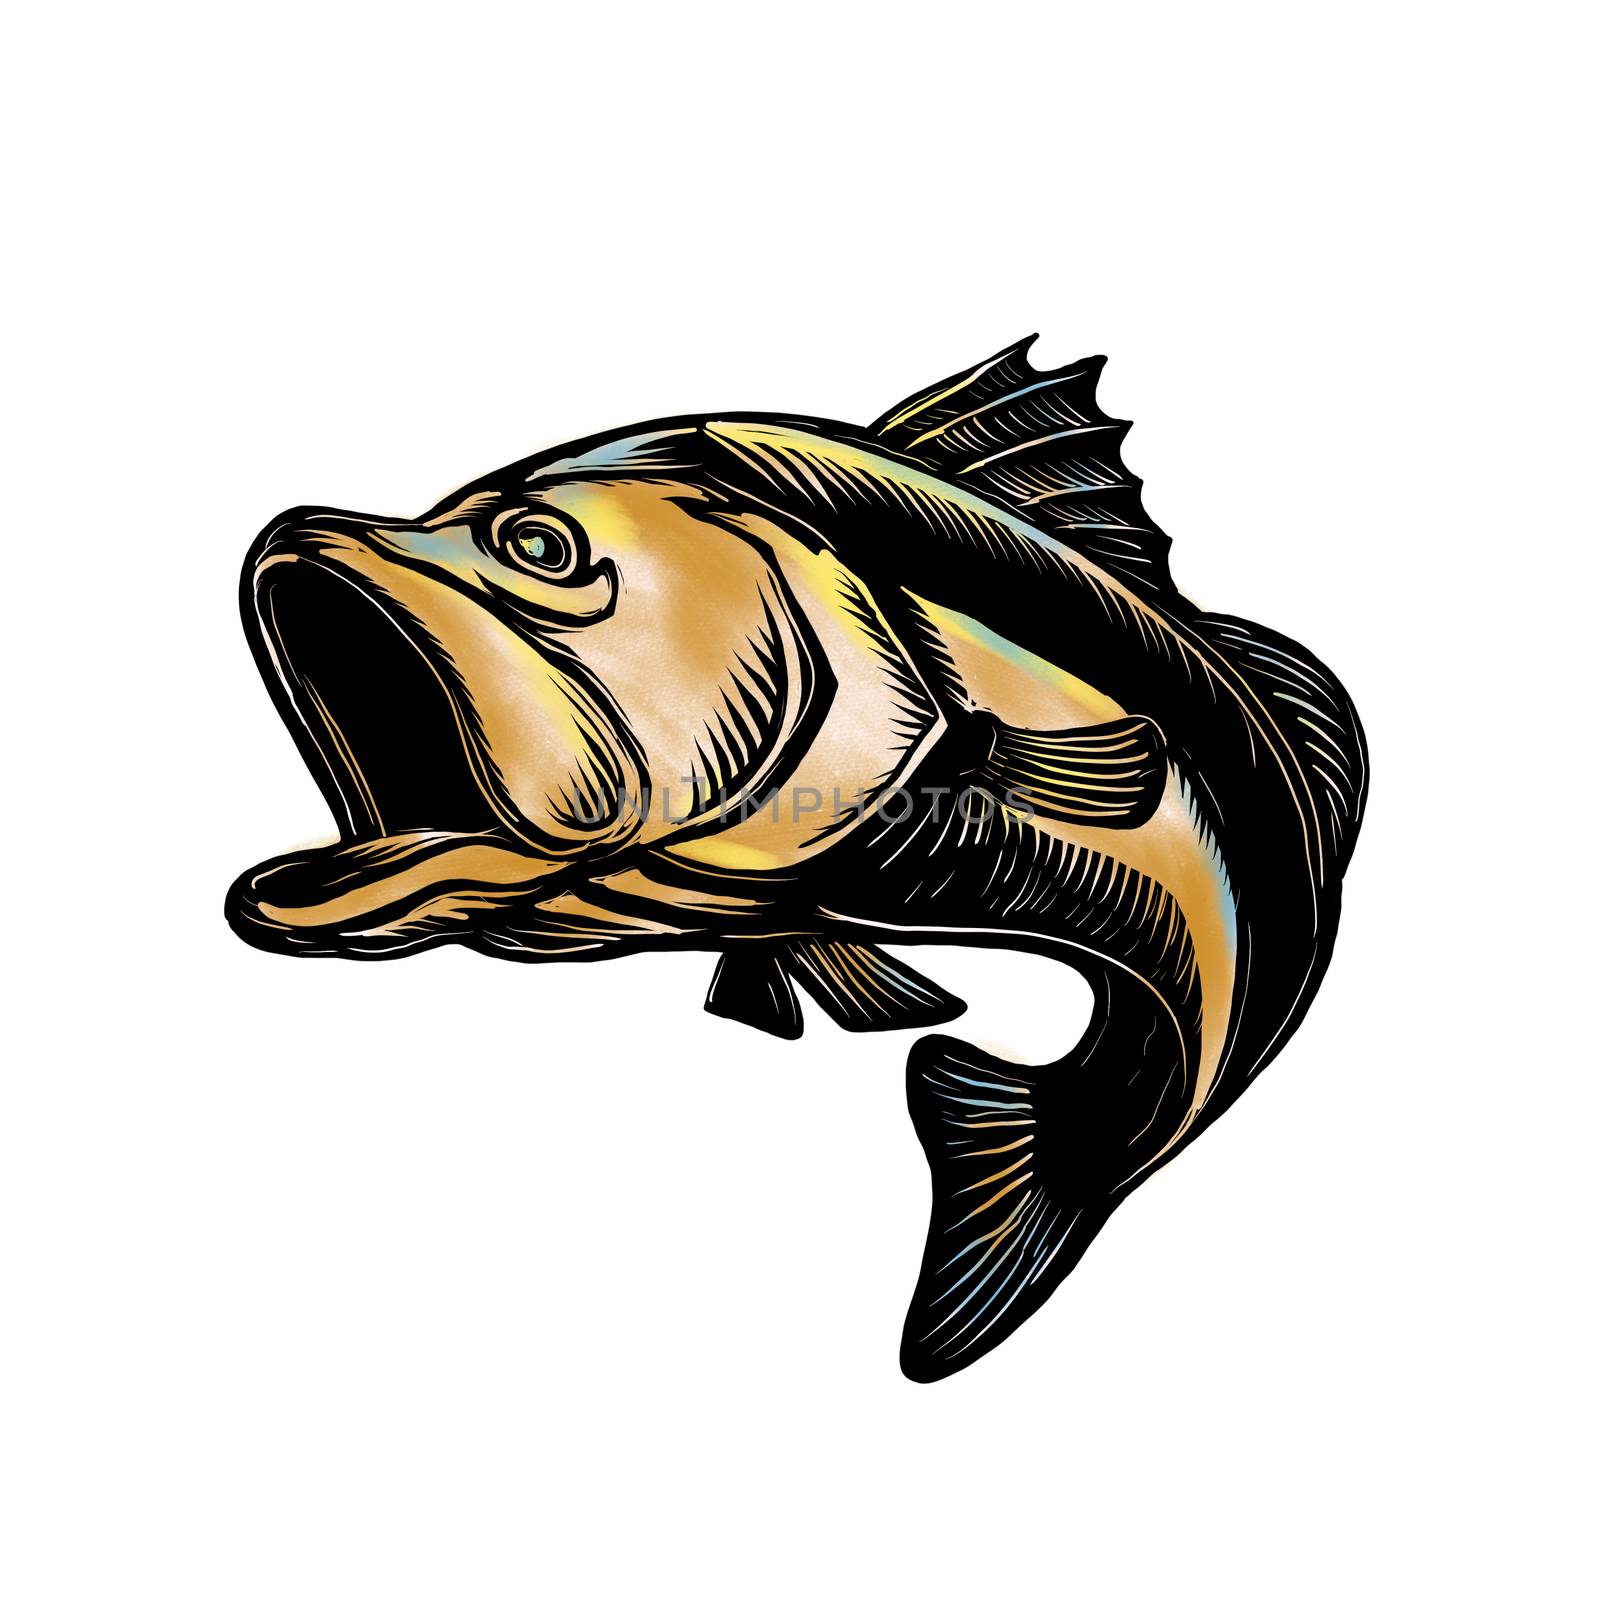 Scratchboard style illustration of a Largemouth Bass ,  Barramundi or Asian sea bass jumping on isolated background.